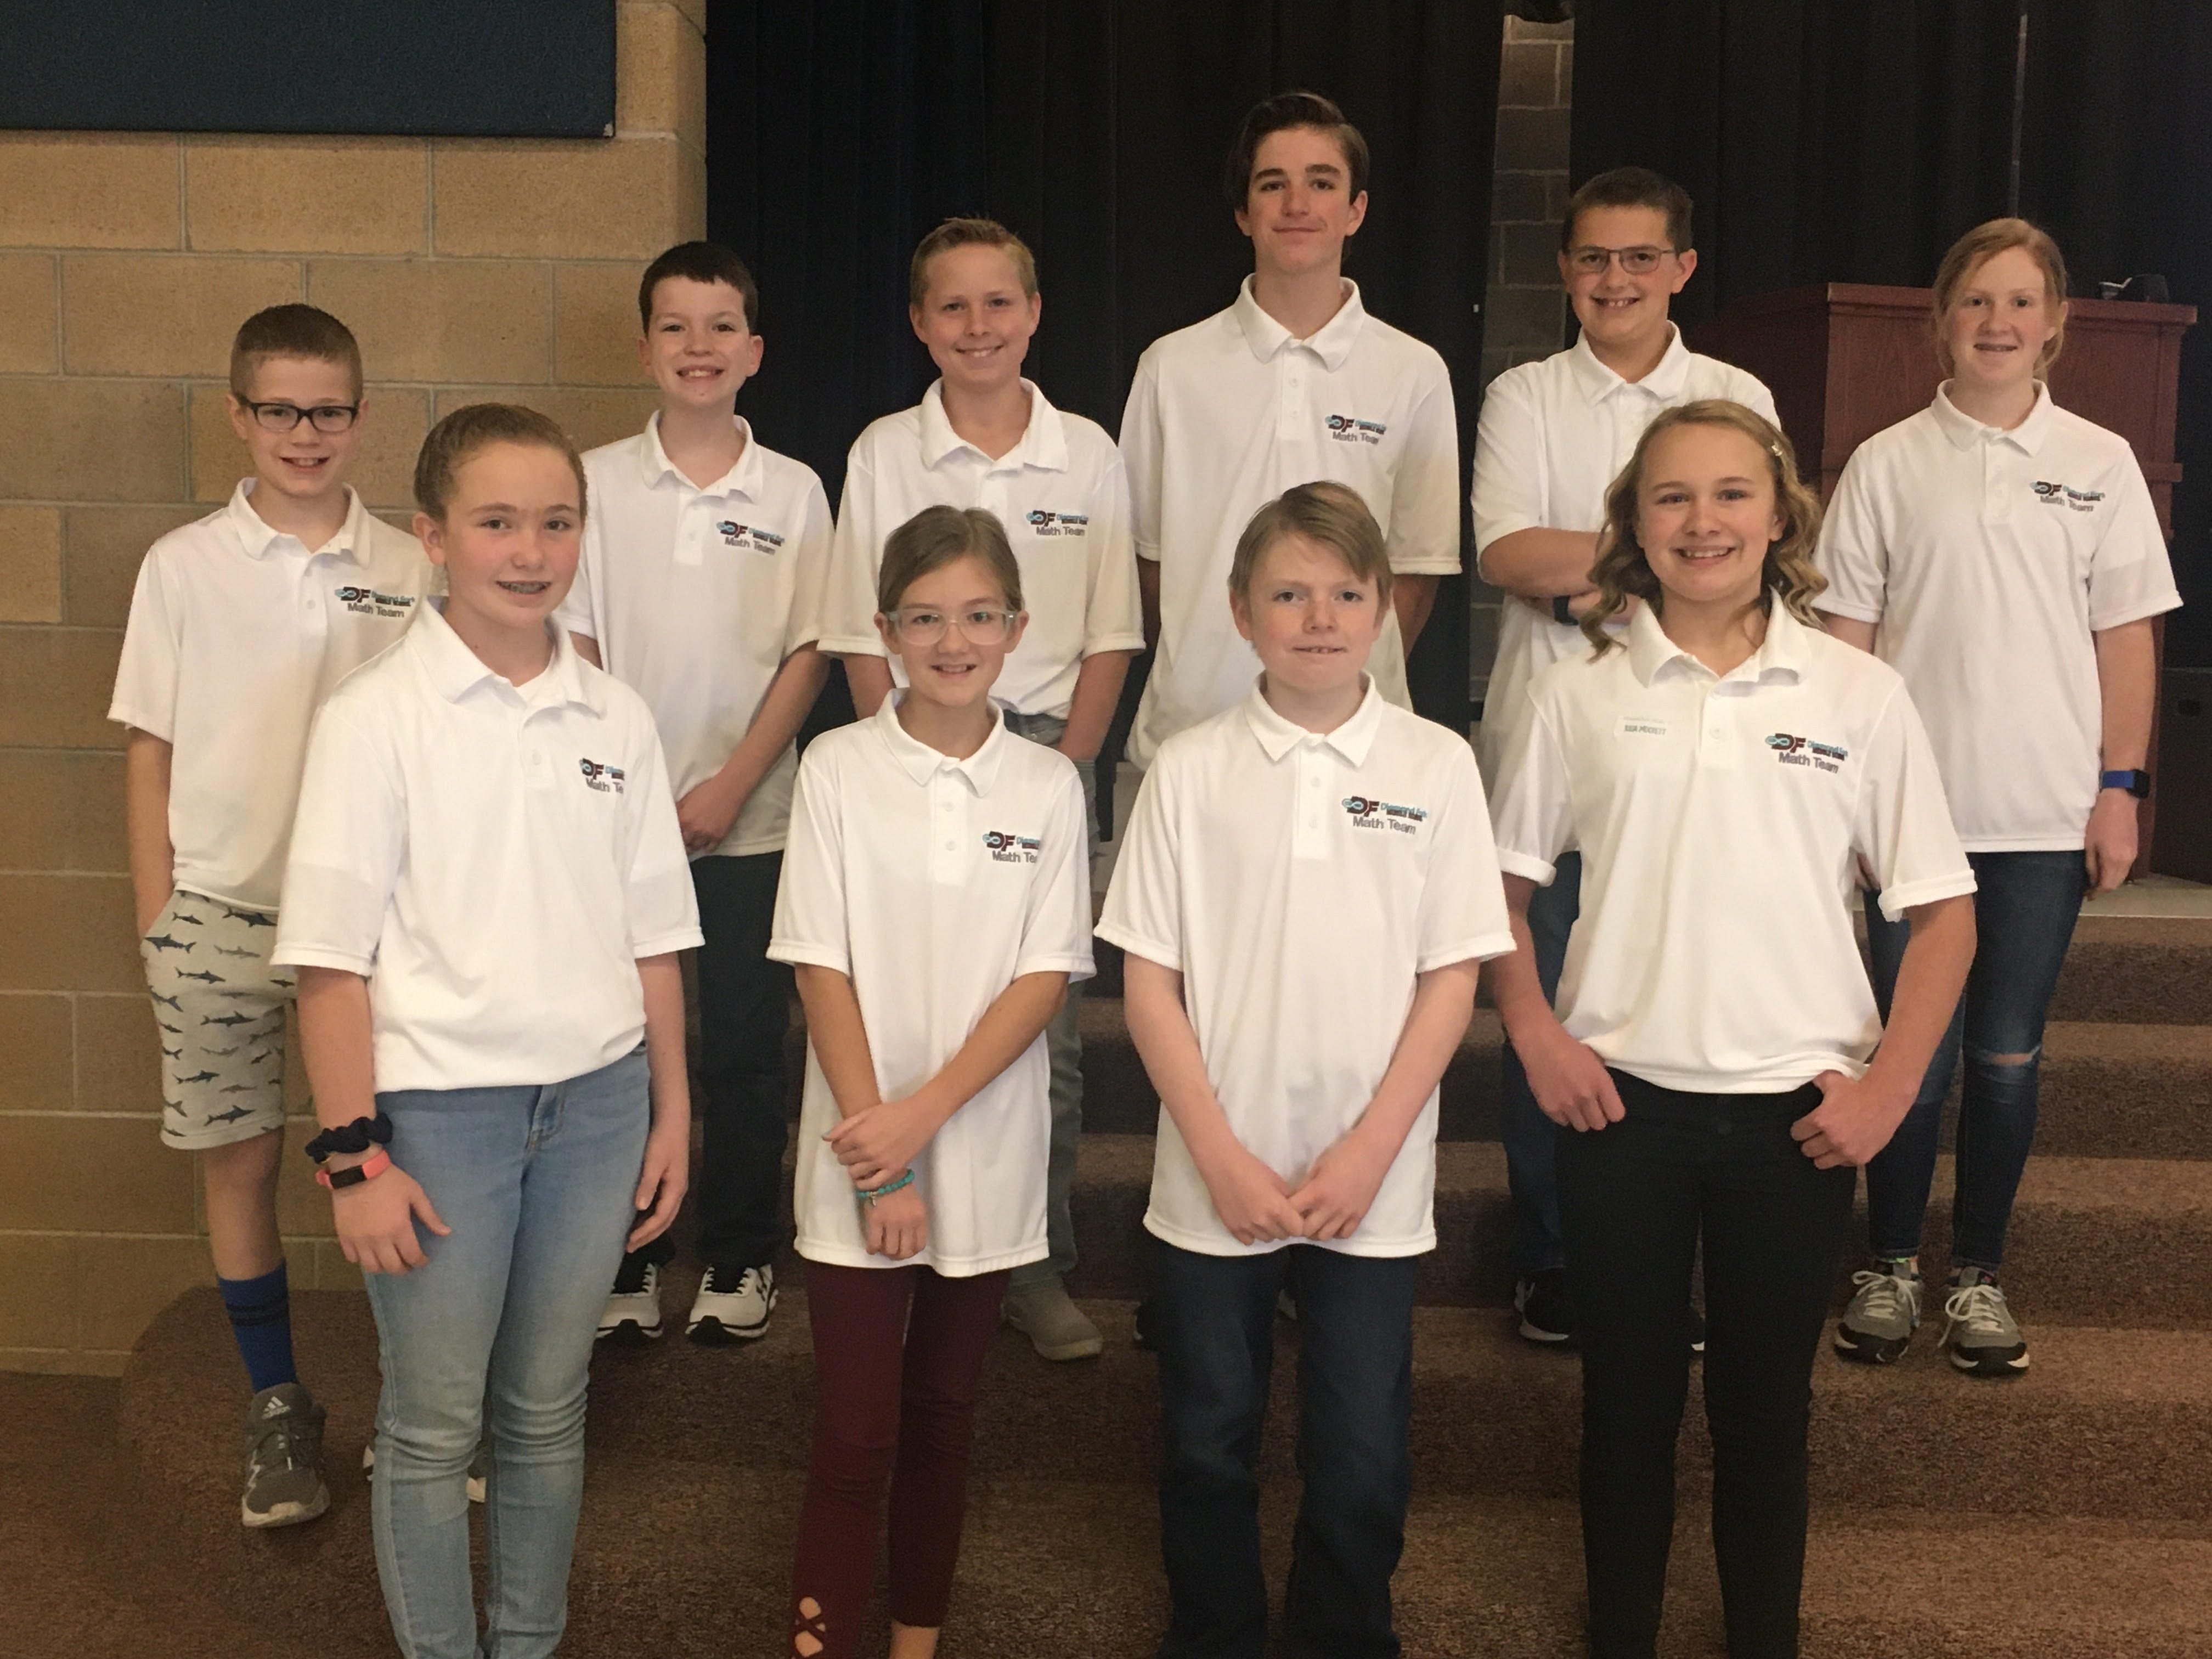 students all in white shirts ready to compete as a math team